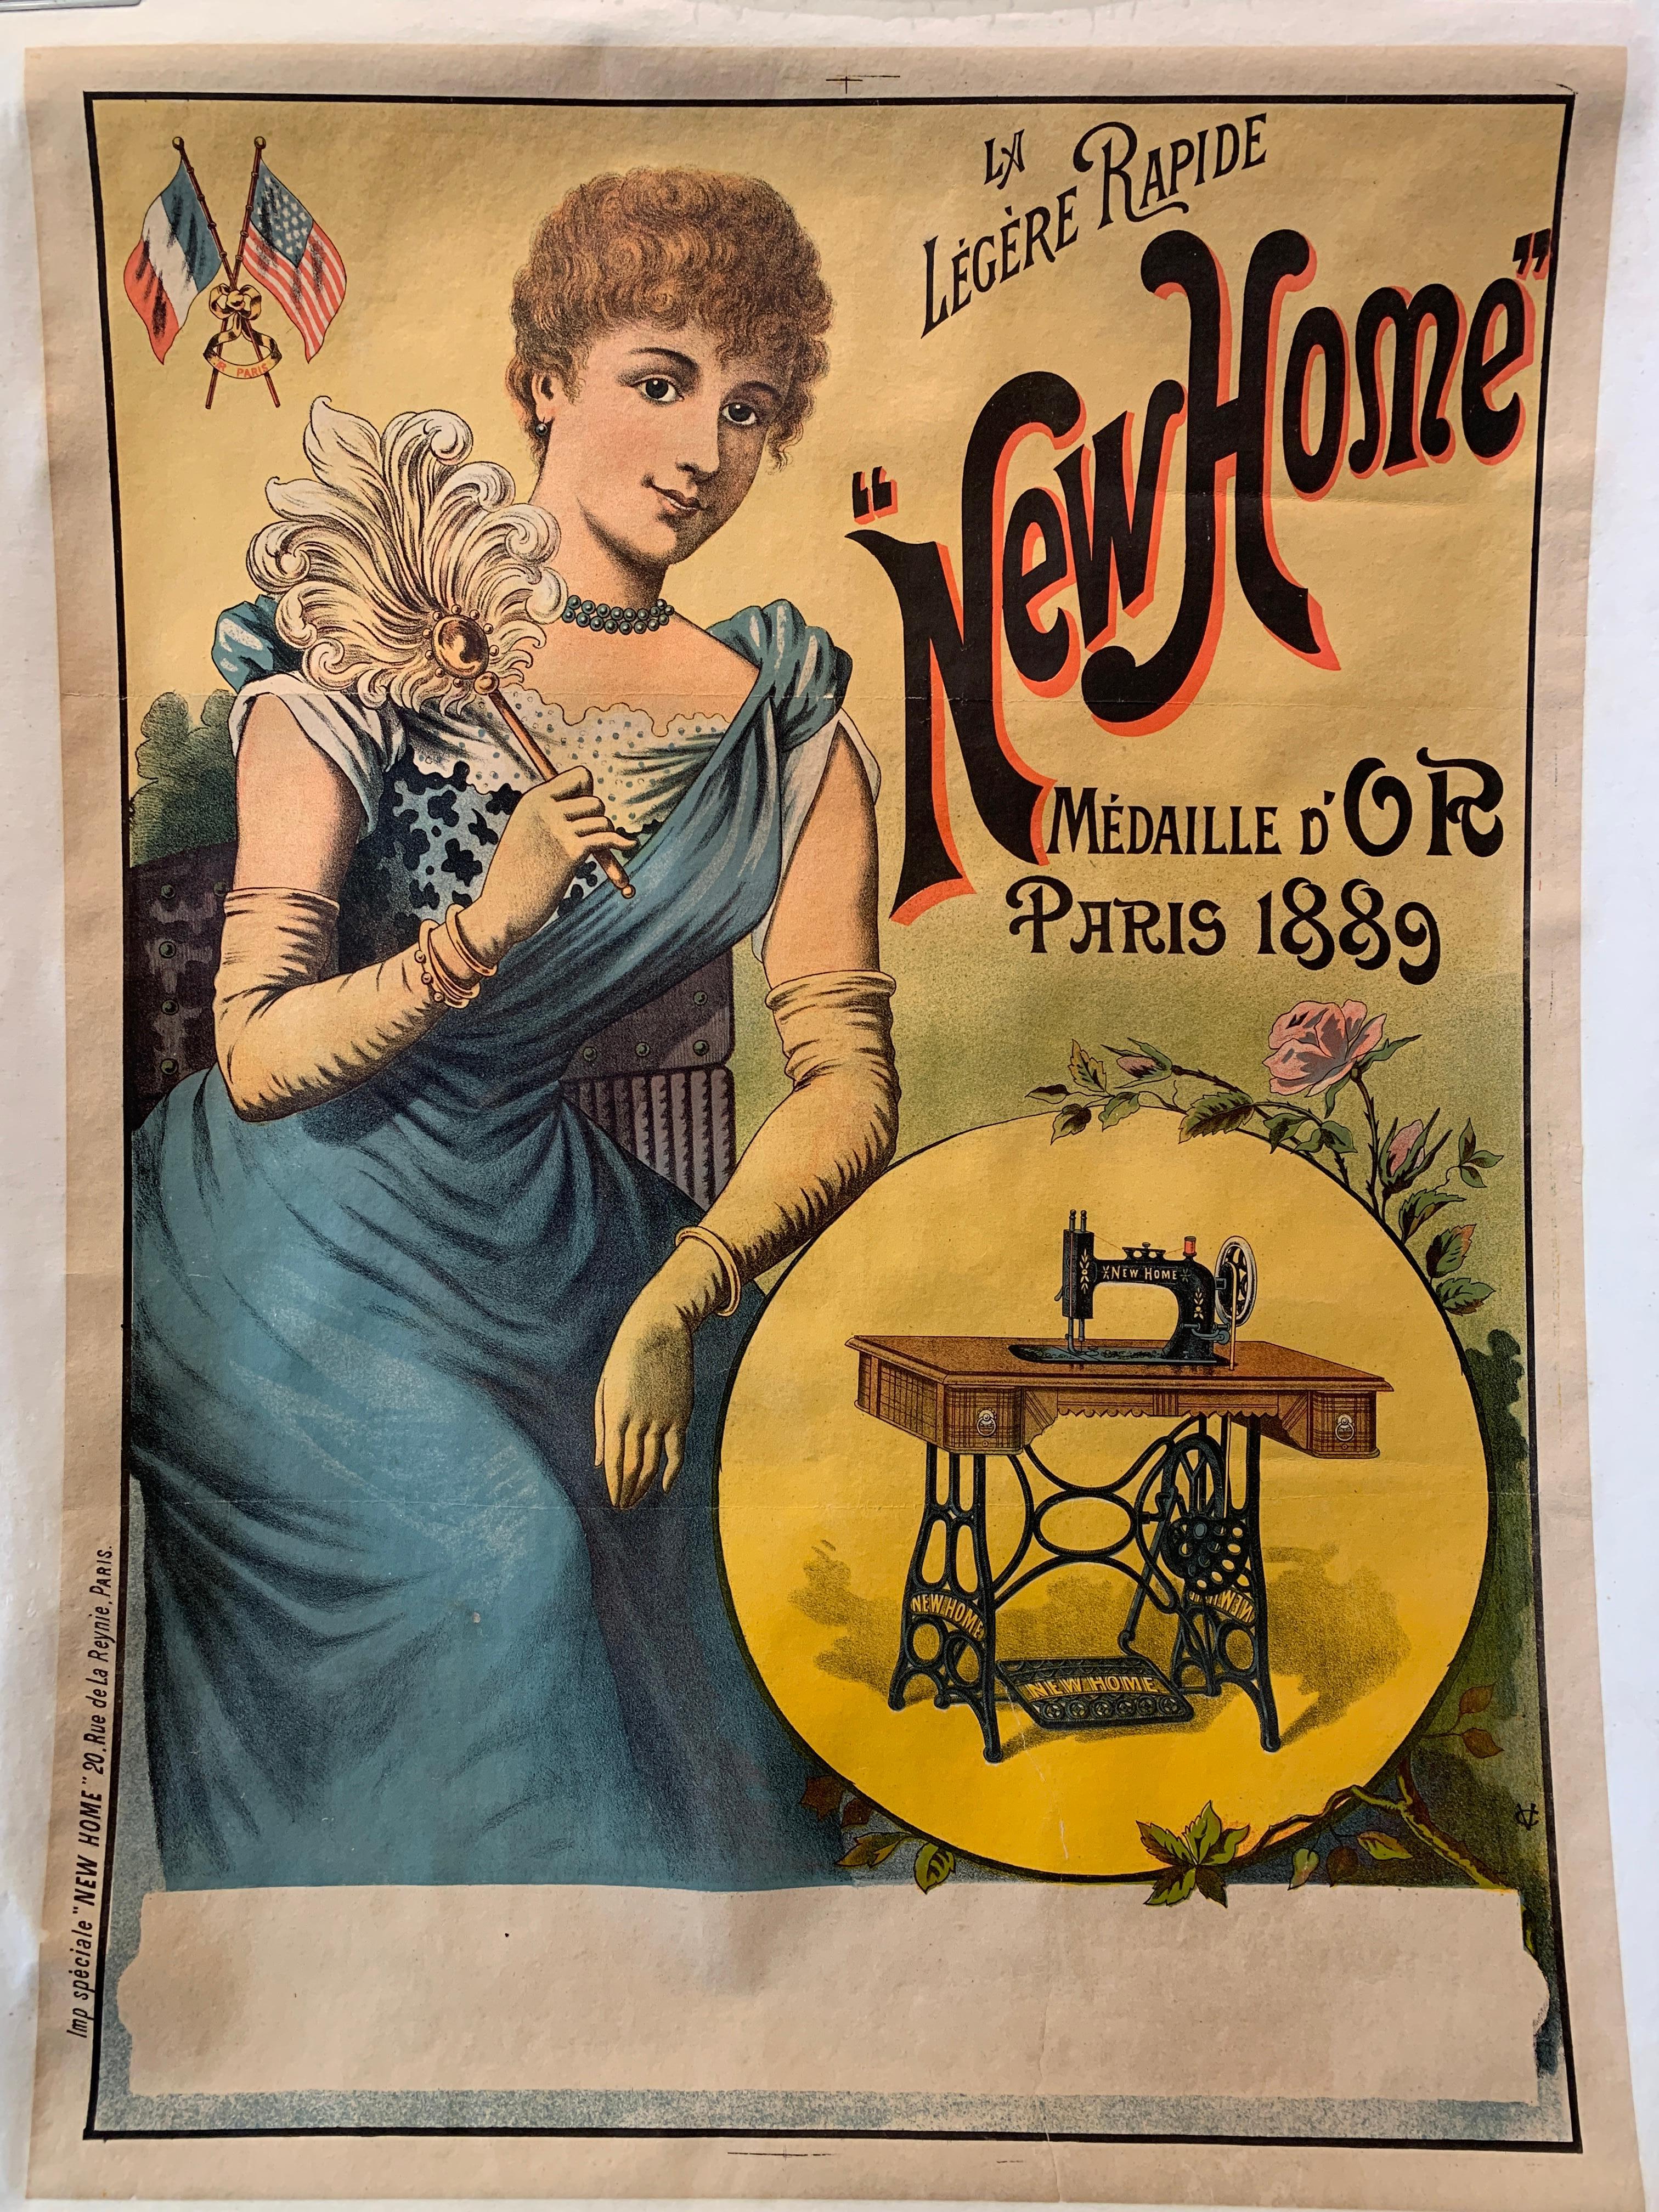 'New Home', Original Antique Early 18th Century Sewing Machine Poster

This is an original poster from 1889, advertising a French brand of sewing machine, 